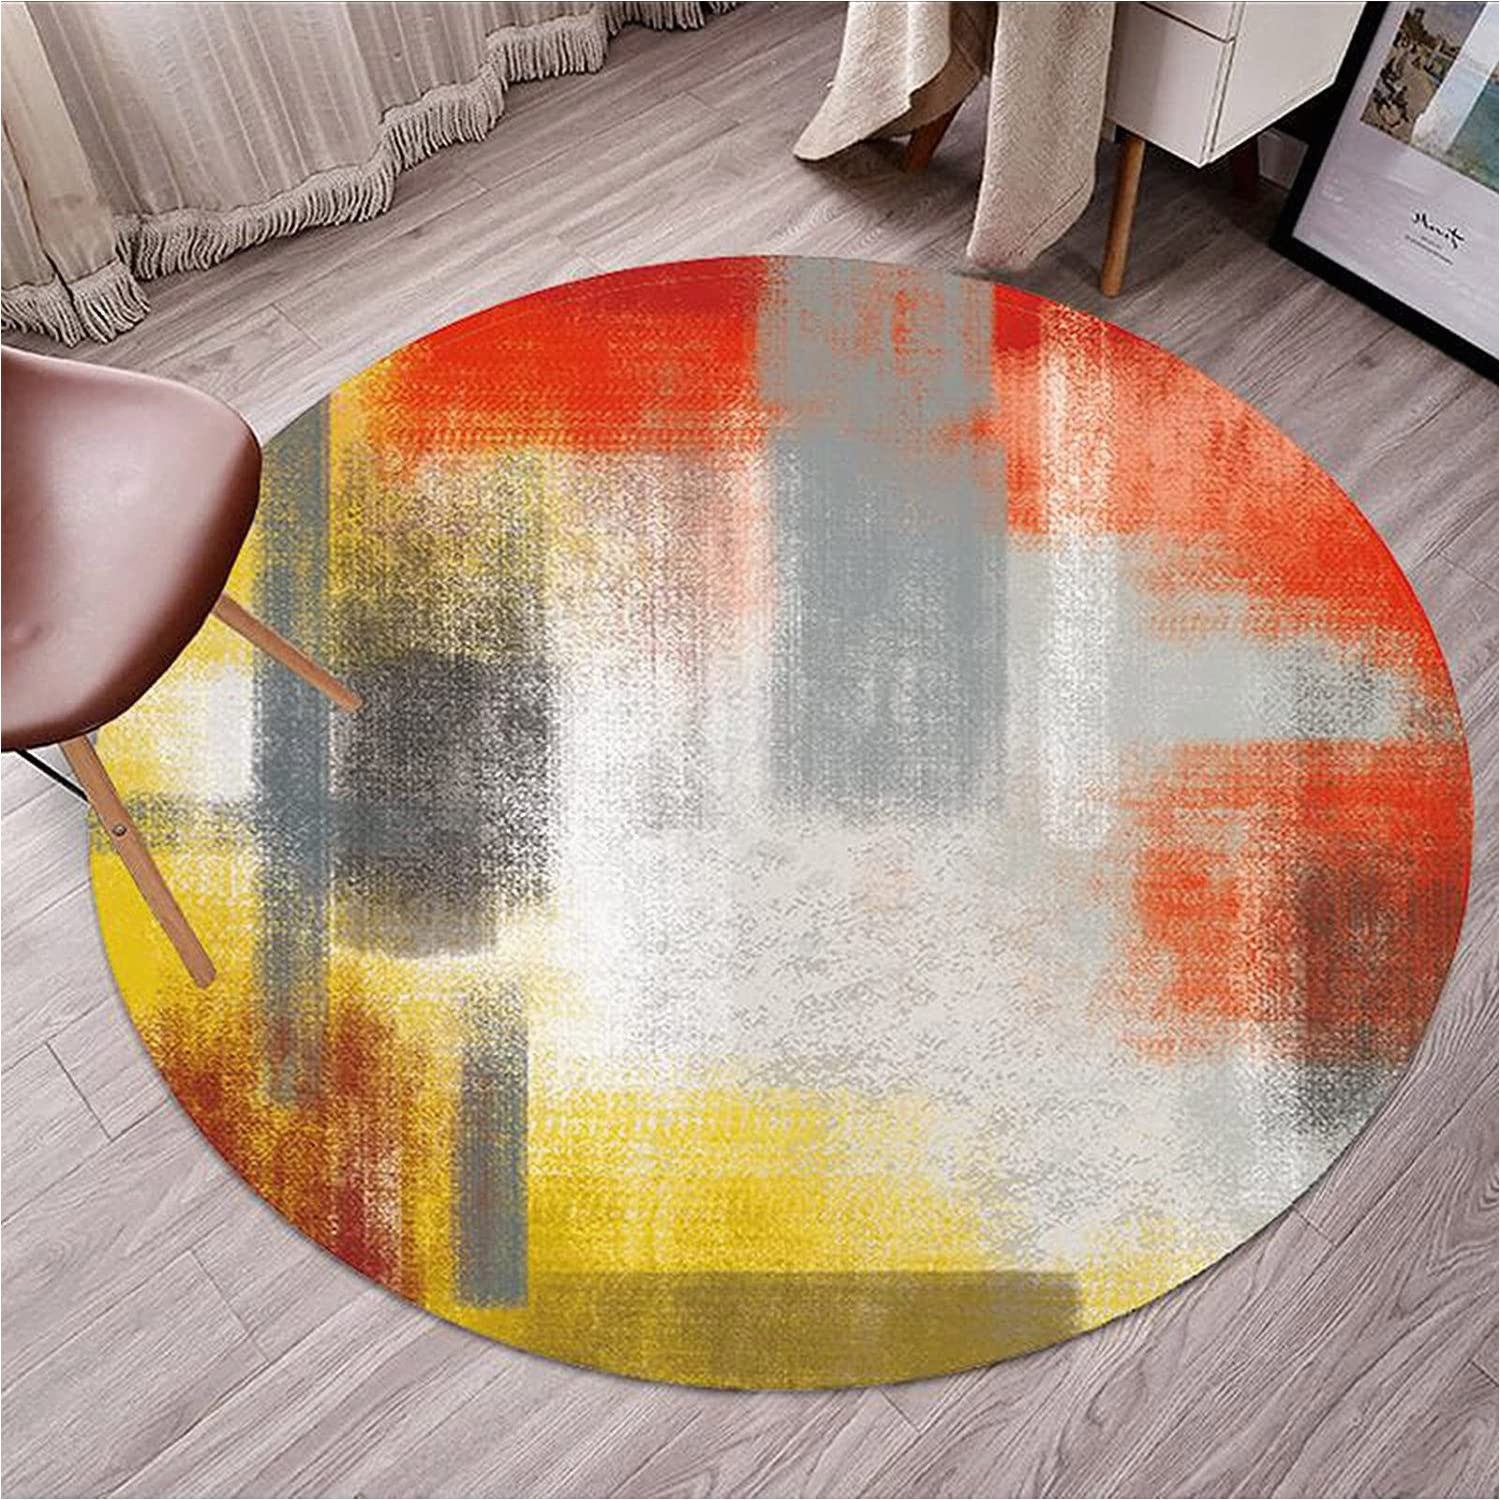 Extra Large Round area Rugs Drsff Modern Red Yellow Round area Rugs for Living Room Bedroom …